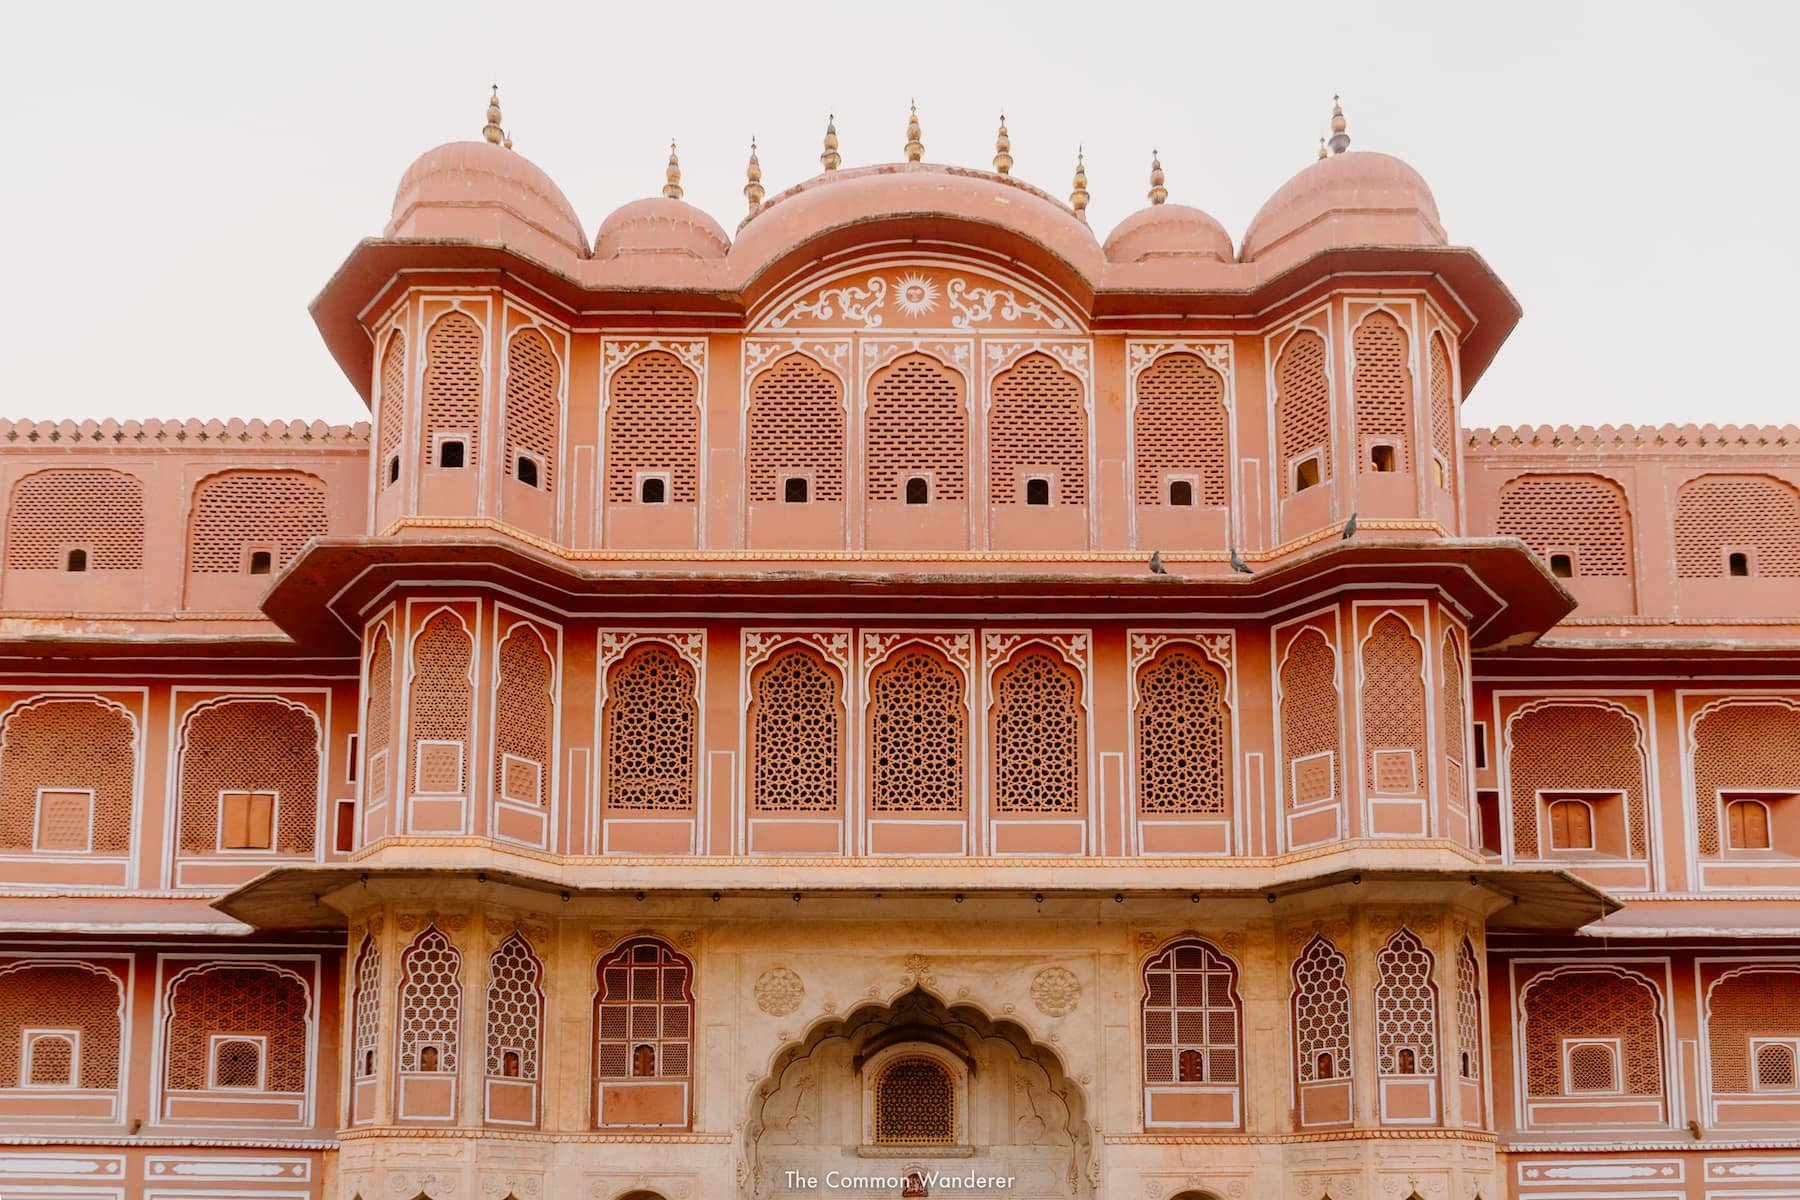 Hawa Mahal – A Full Guide to the Palace of Winds in Jaipur